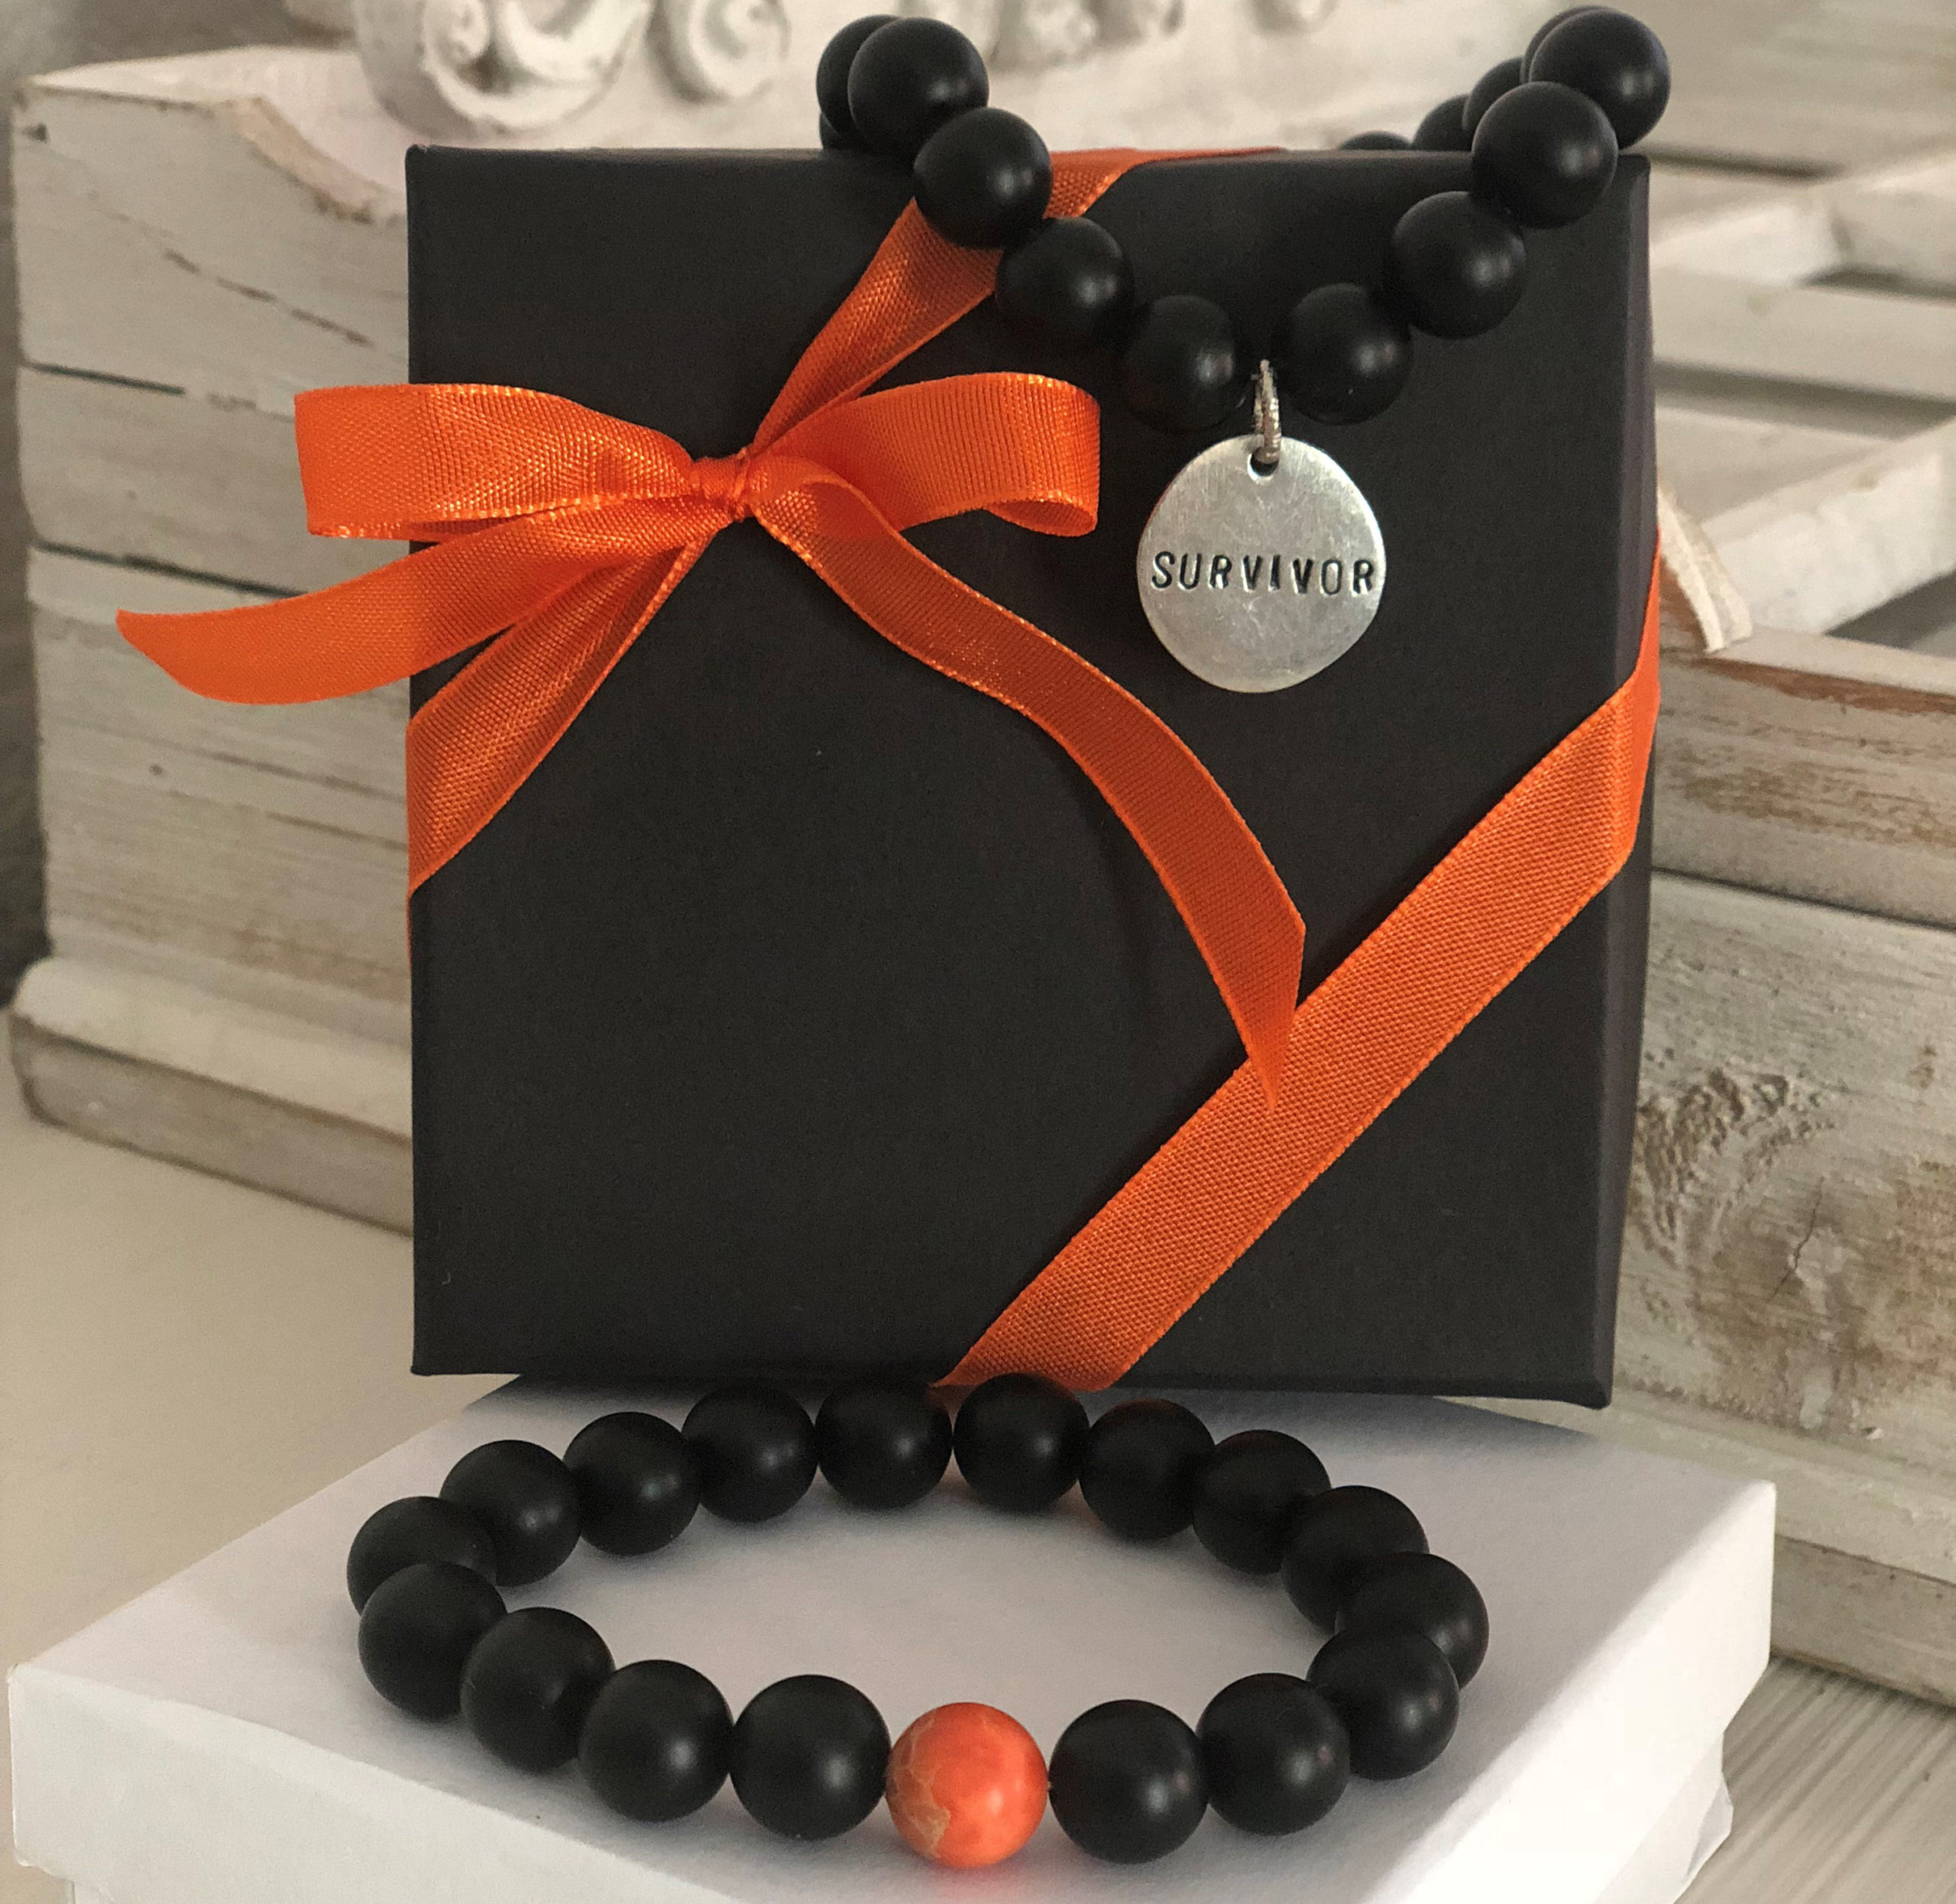 Bracelets made of black and orange beads and a pendant that says Survivor